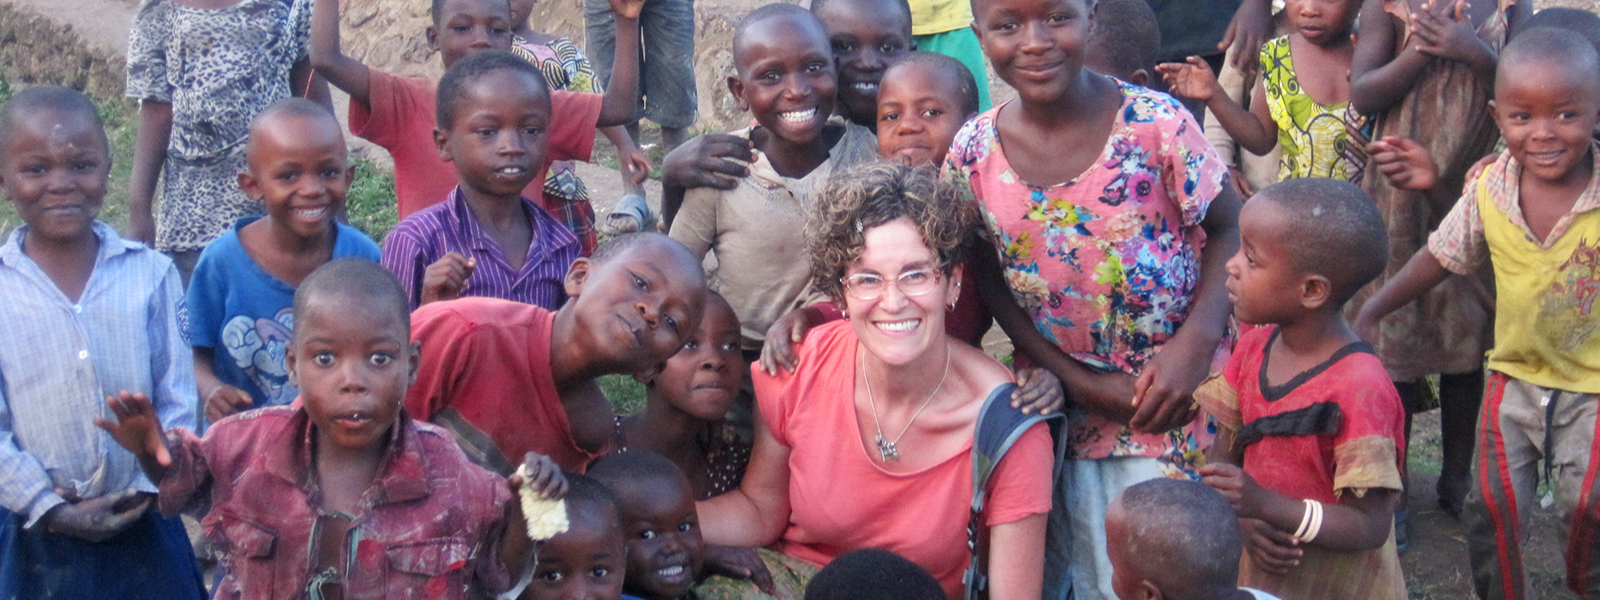 Founder Brooke Sulahian surrounded by local children in Angola